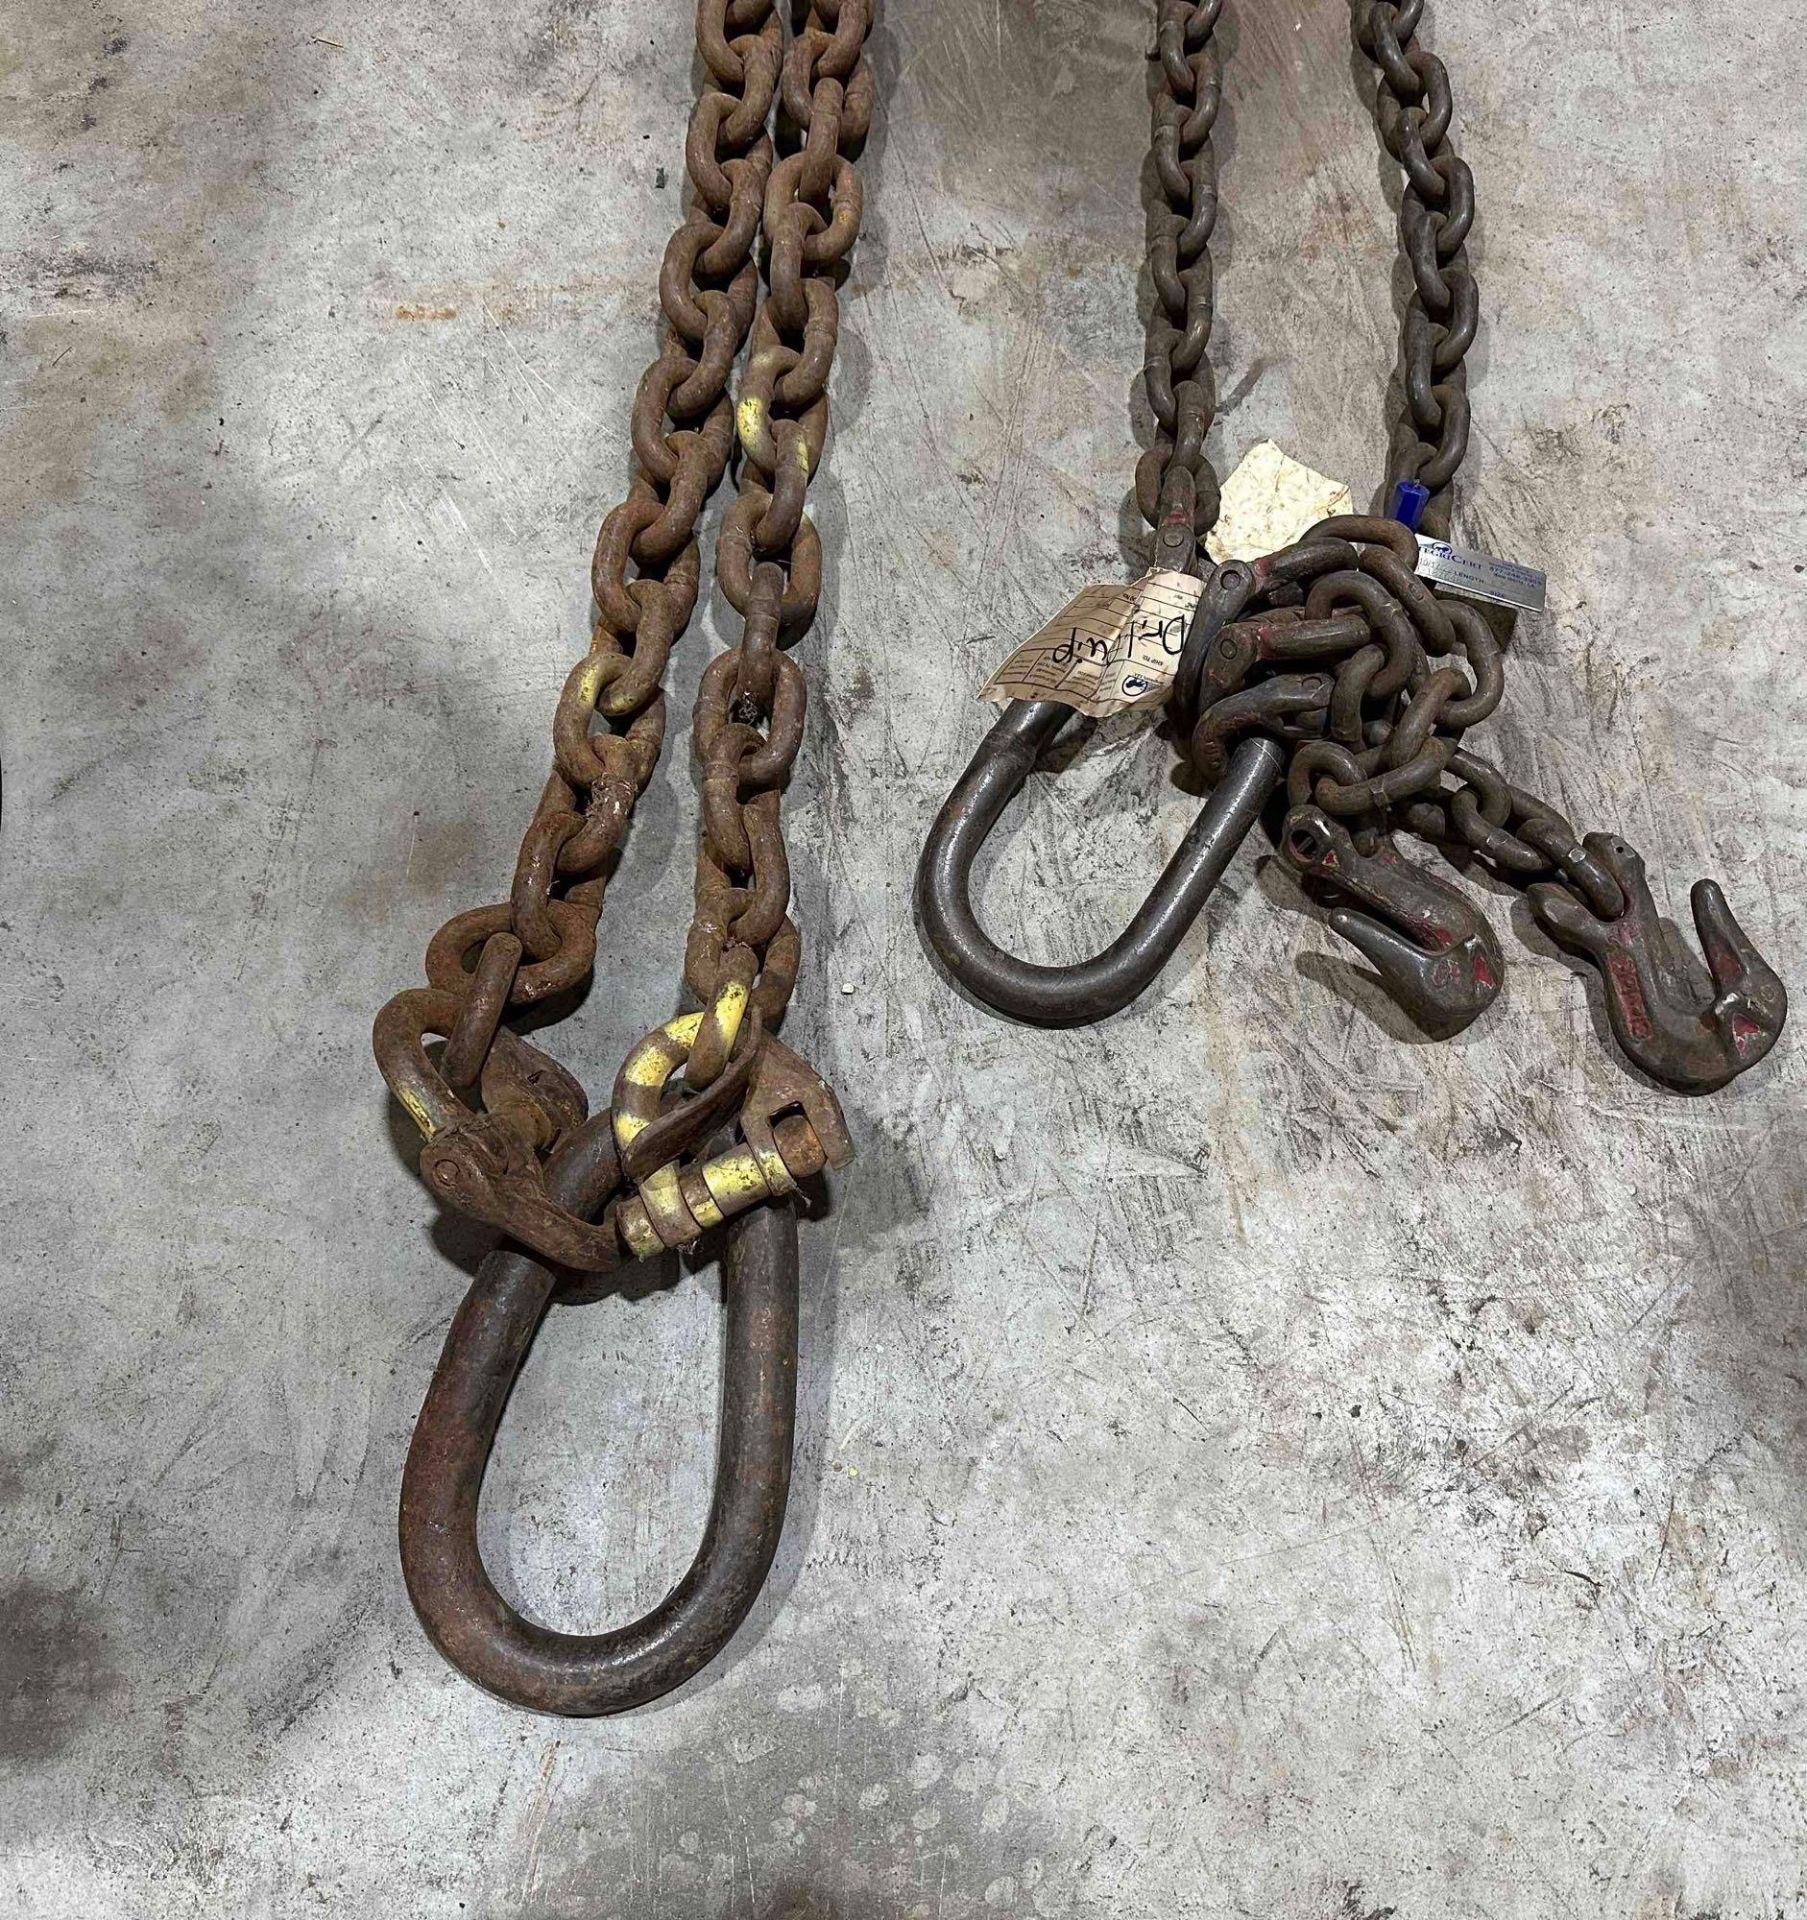 Lot of 2 Chains with Hooks, Assorted Lengths - Image 2 of 6